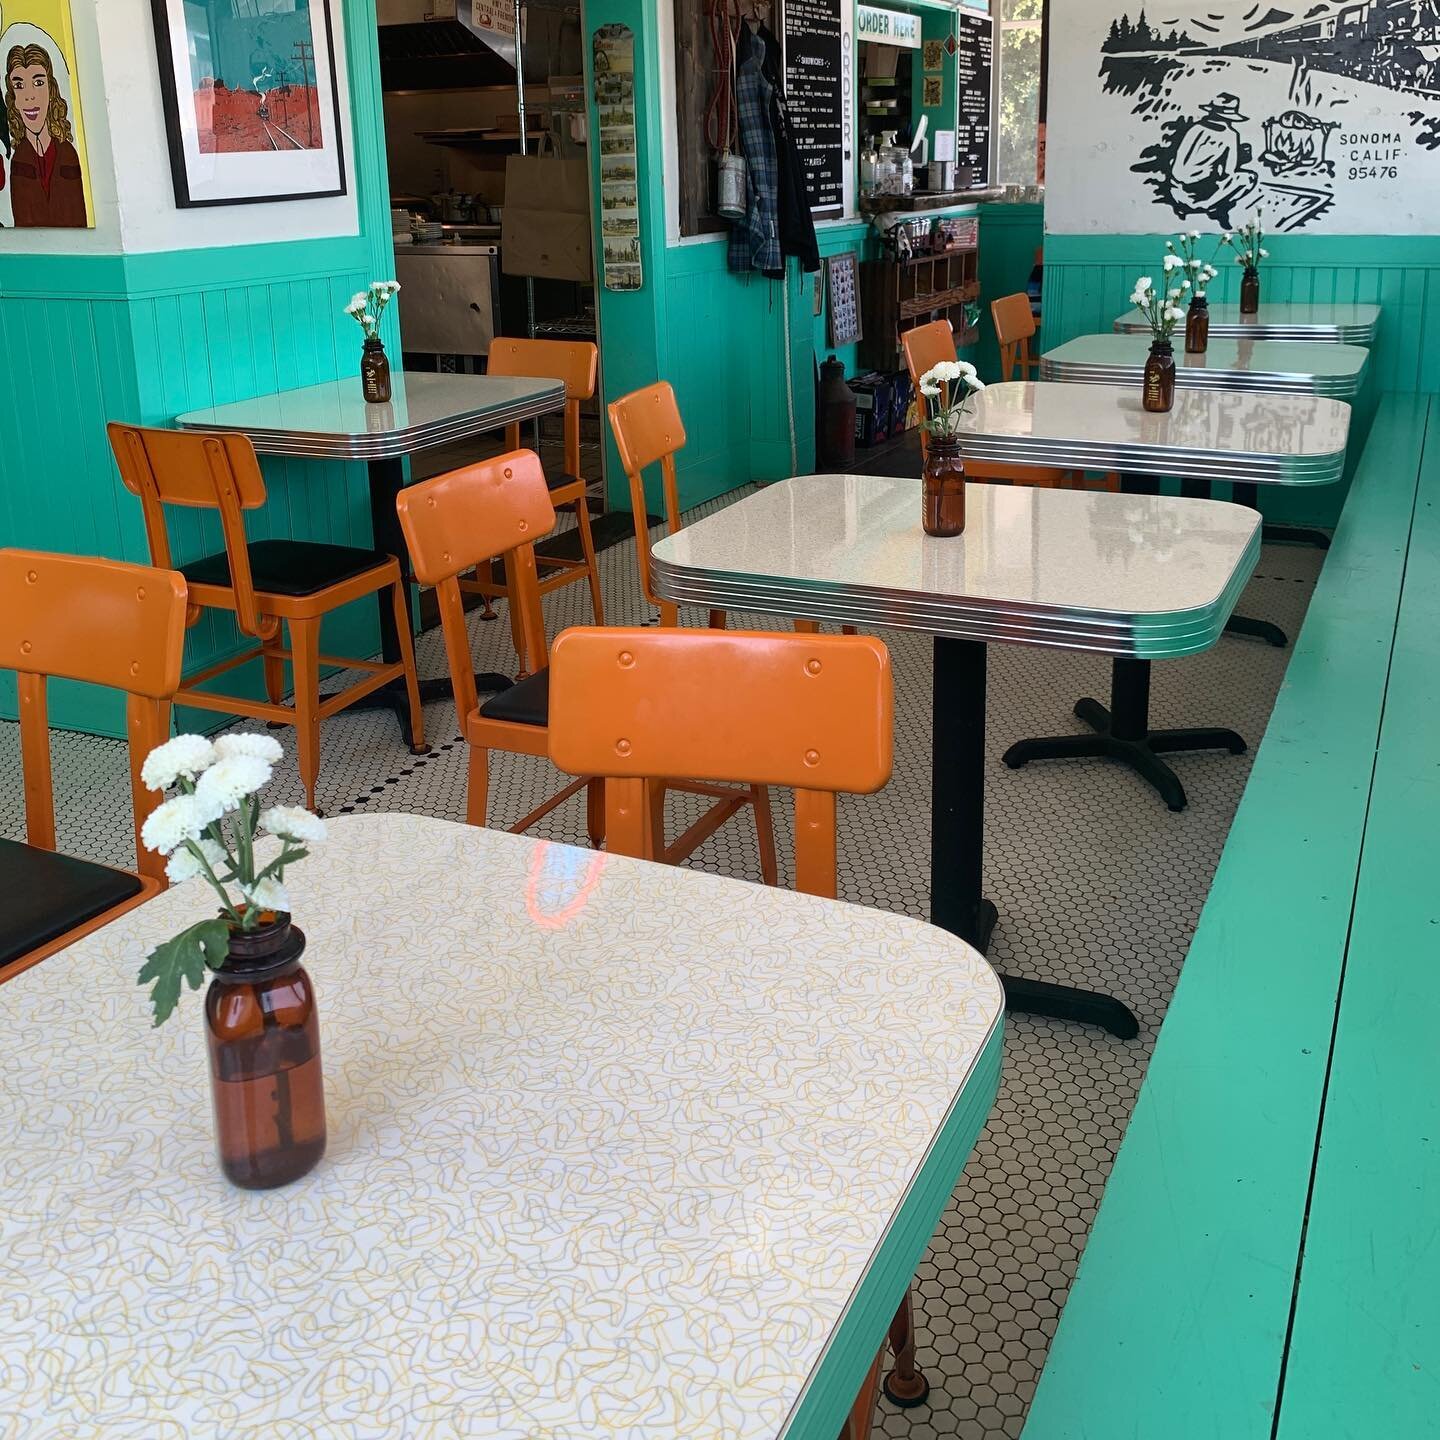 Come in today and check out our new tables! Just came in yesterday :) we&rsquo;re gonna be open from 11-3 today and tomorrow. And we will sadly be closed this Sunday 😢 so come on in while we&rsquo;re open and get your fix! 🤠